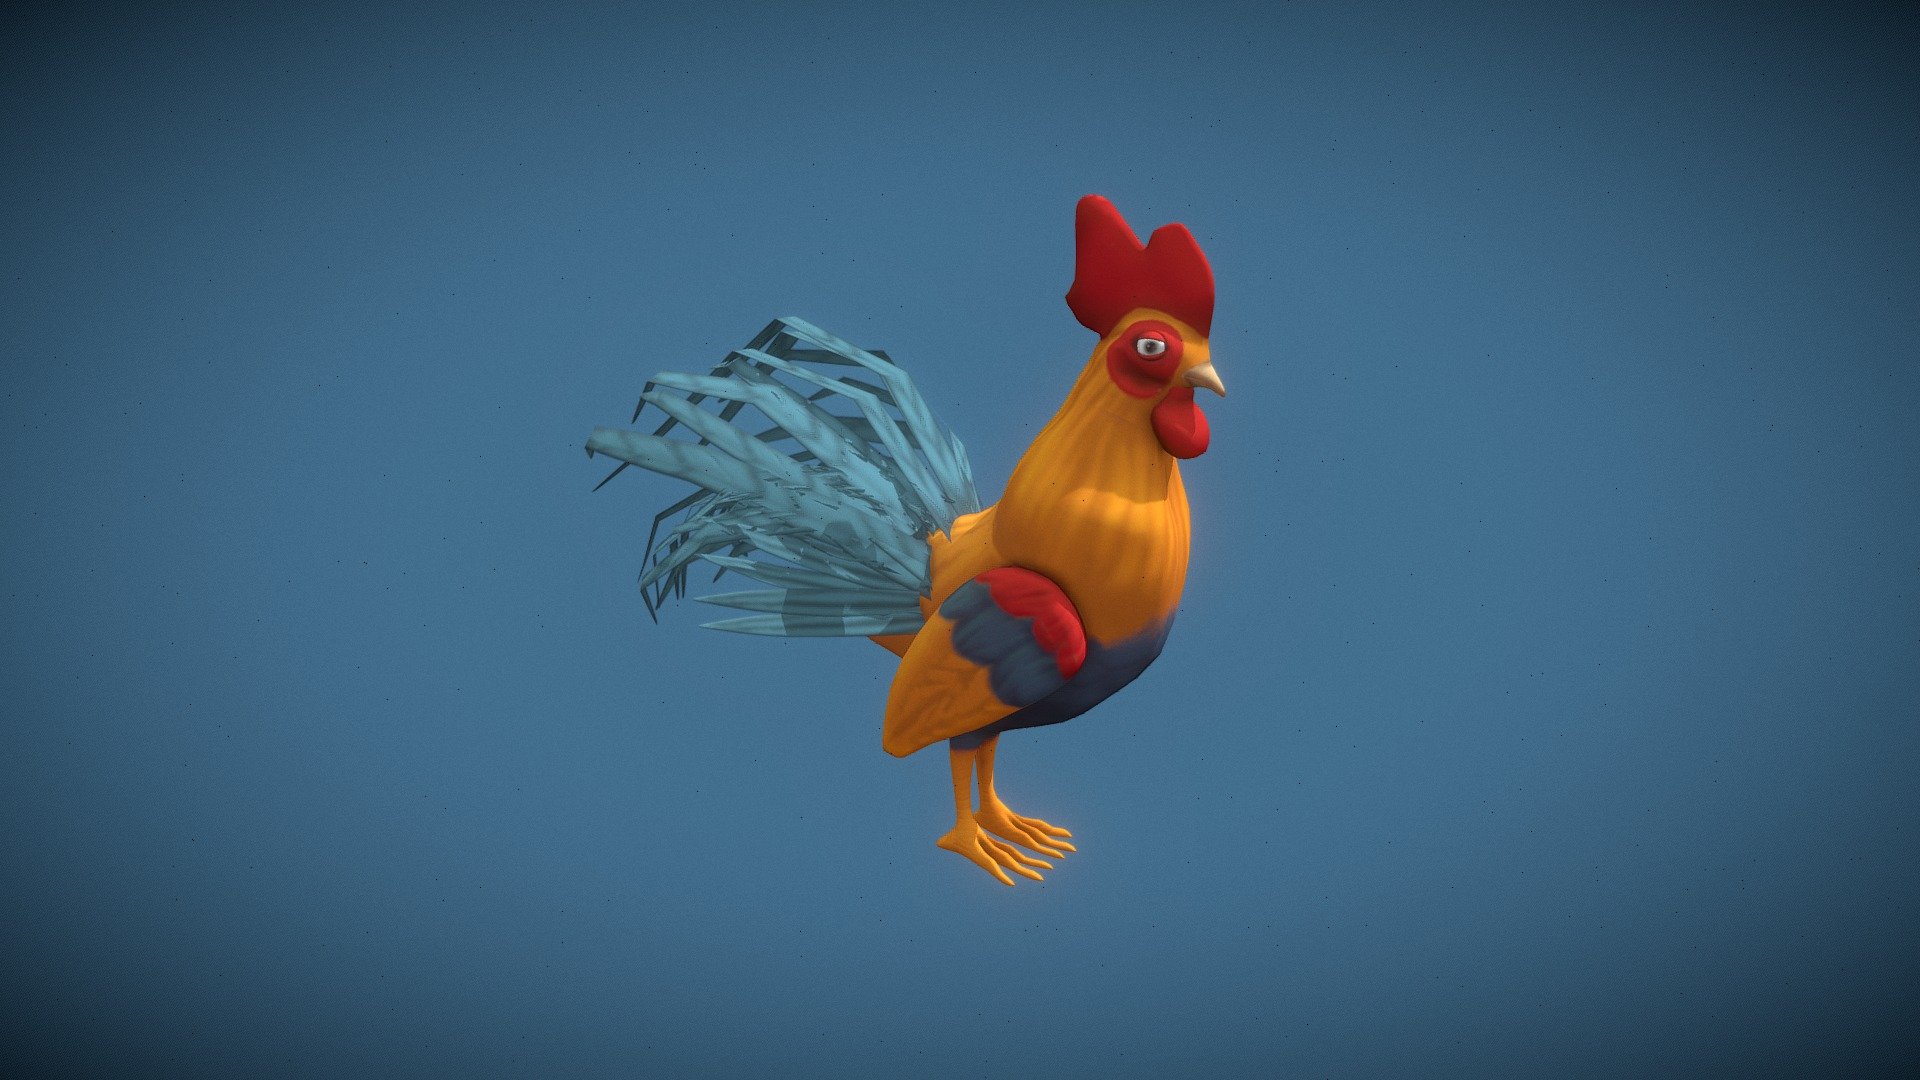 A cool low poly rooster
Process: Low poly in Maya / High poly in Zbrush / Baking with Marmorset / Textured with Substance Painter - Stylized Rooster - Download Free 3D model by KillTheSaint 3d model